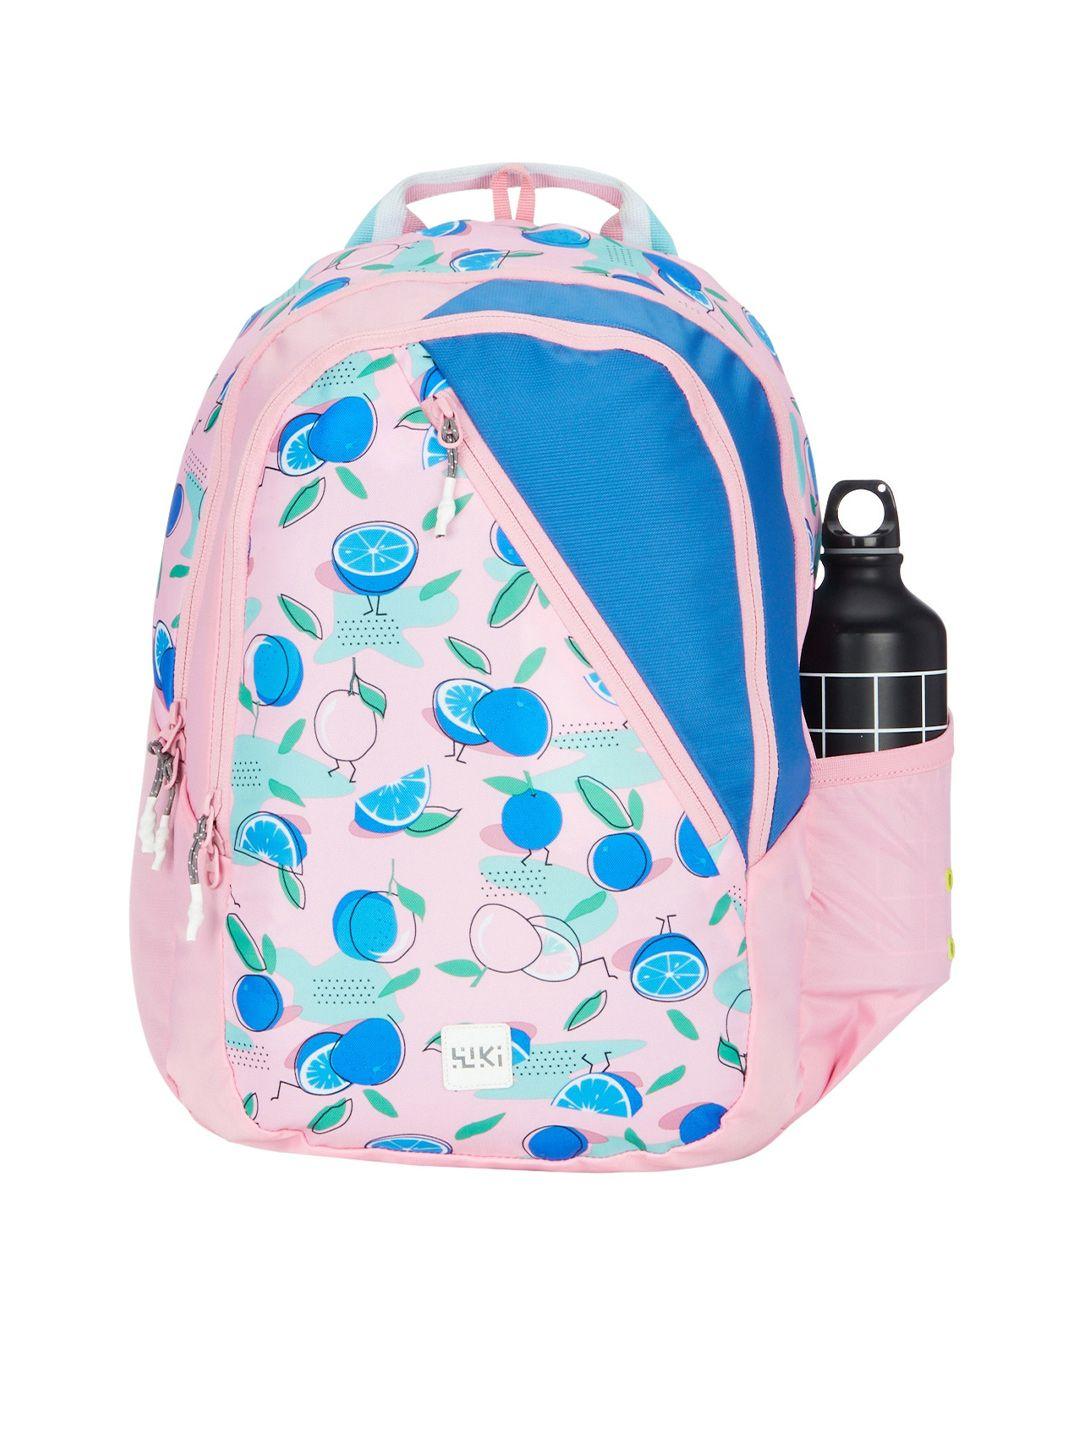 wildcraft graphic printed wiki girl-1 backpack